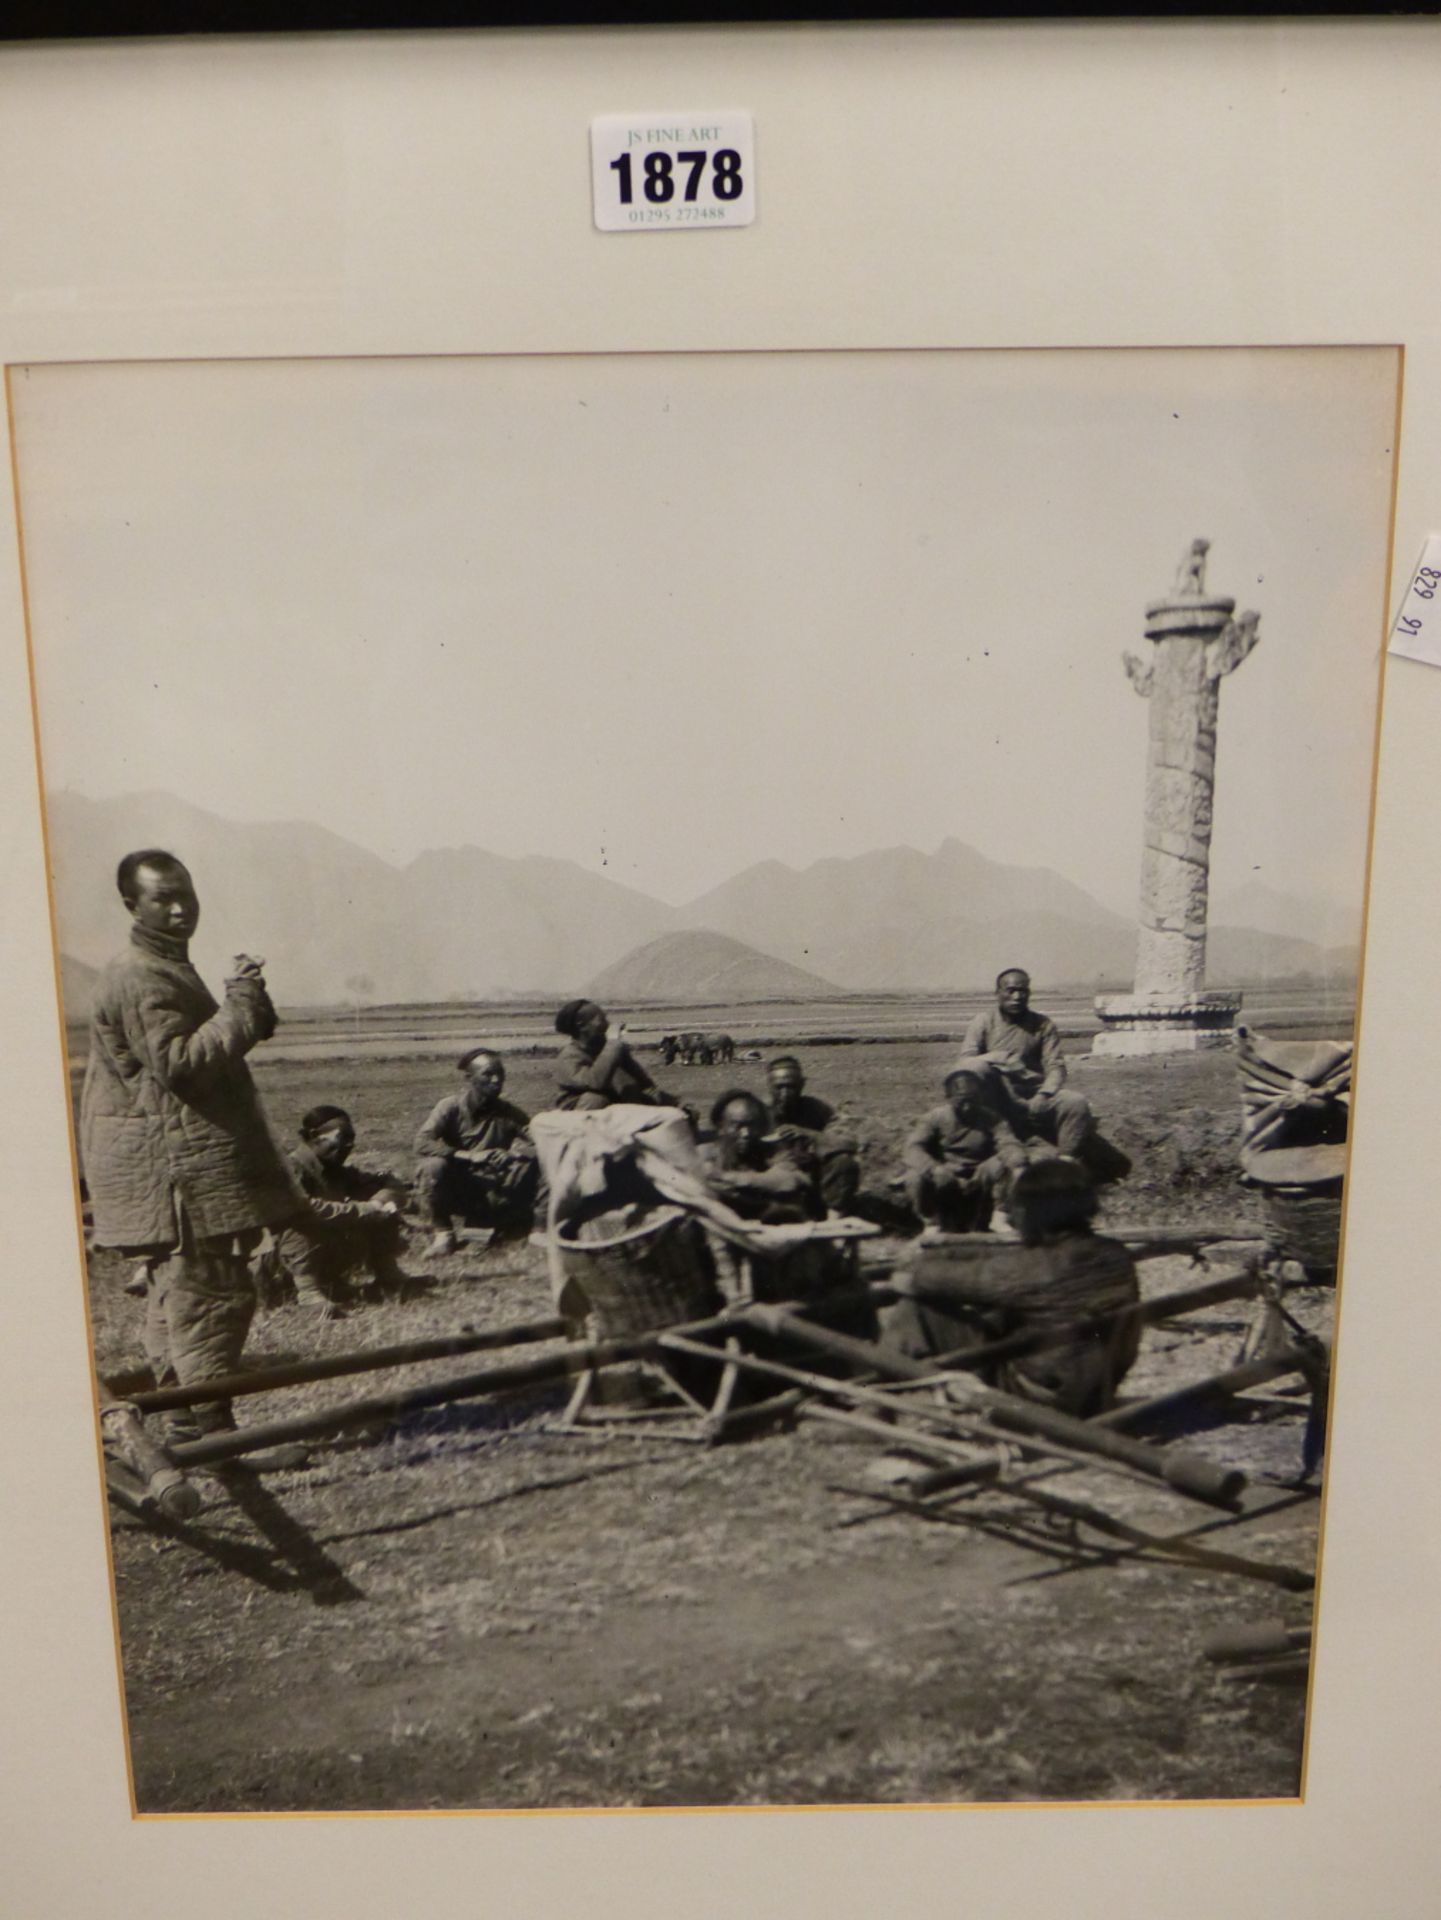 A SILVER PRINT TAKEN FROM THE ORIGINAL NEGATIVE OF THE HOLY WAY, CHINA, C.1910, WITH CHAIR BEARERS